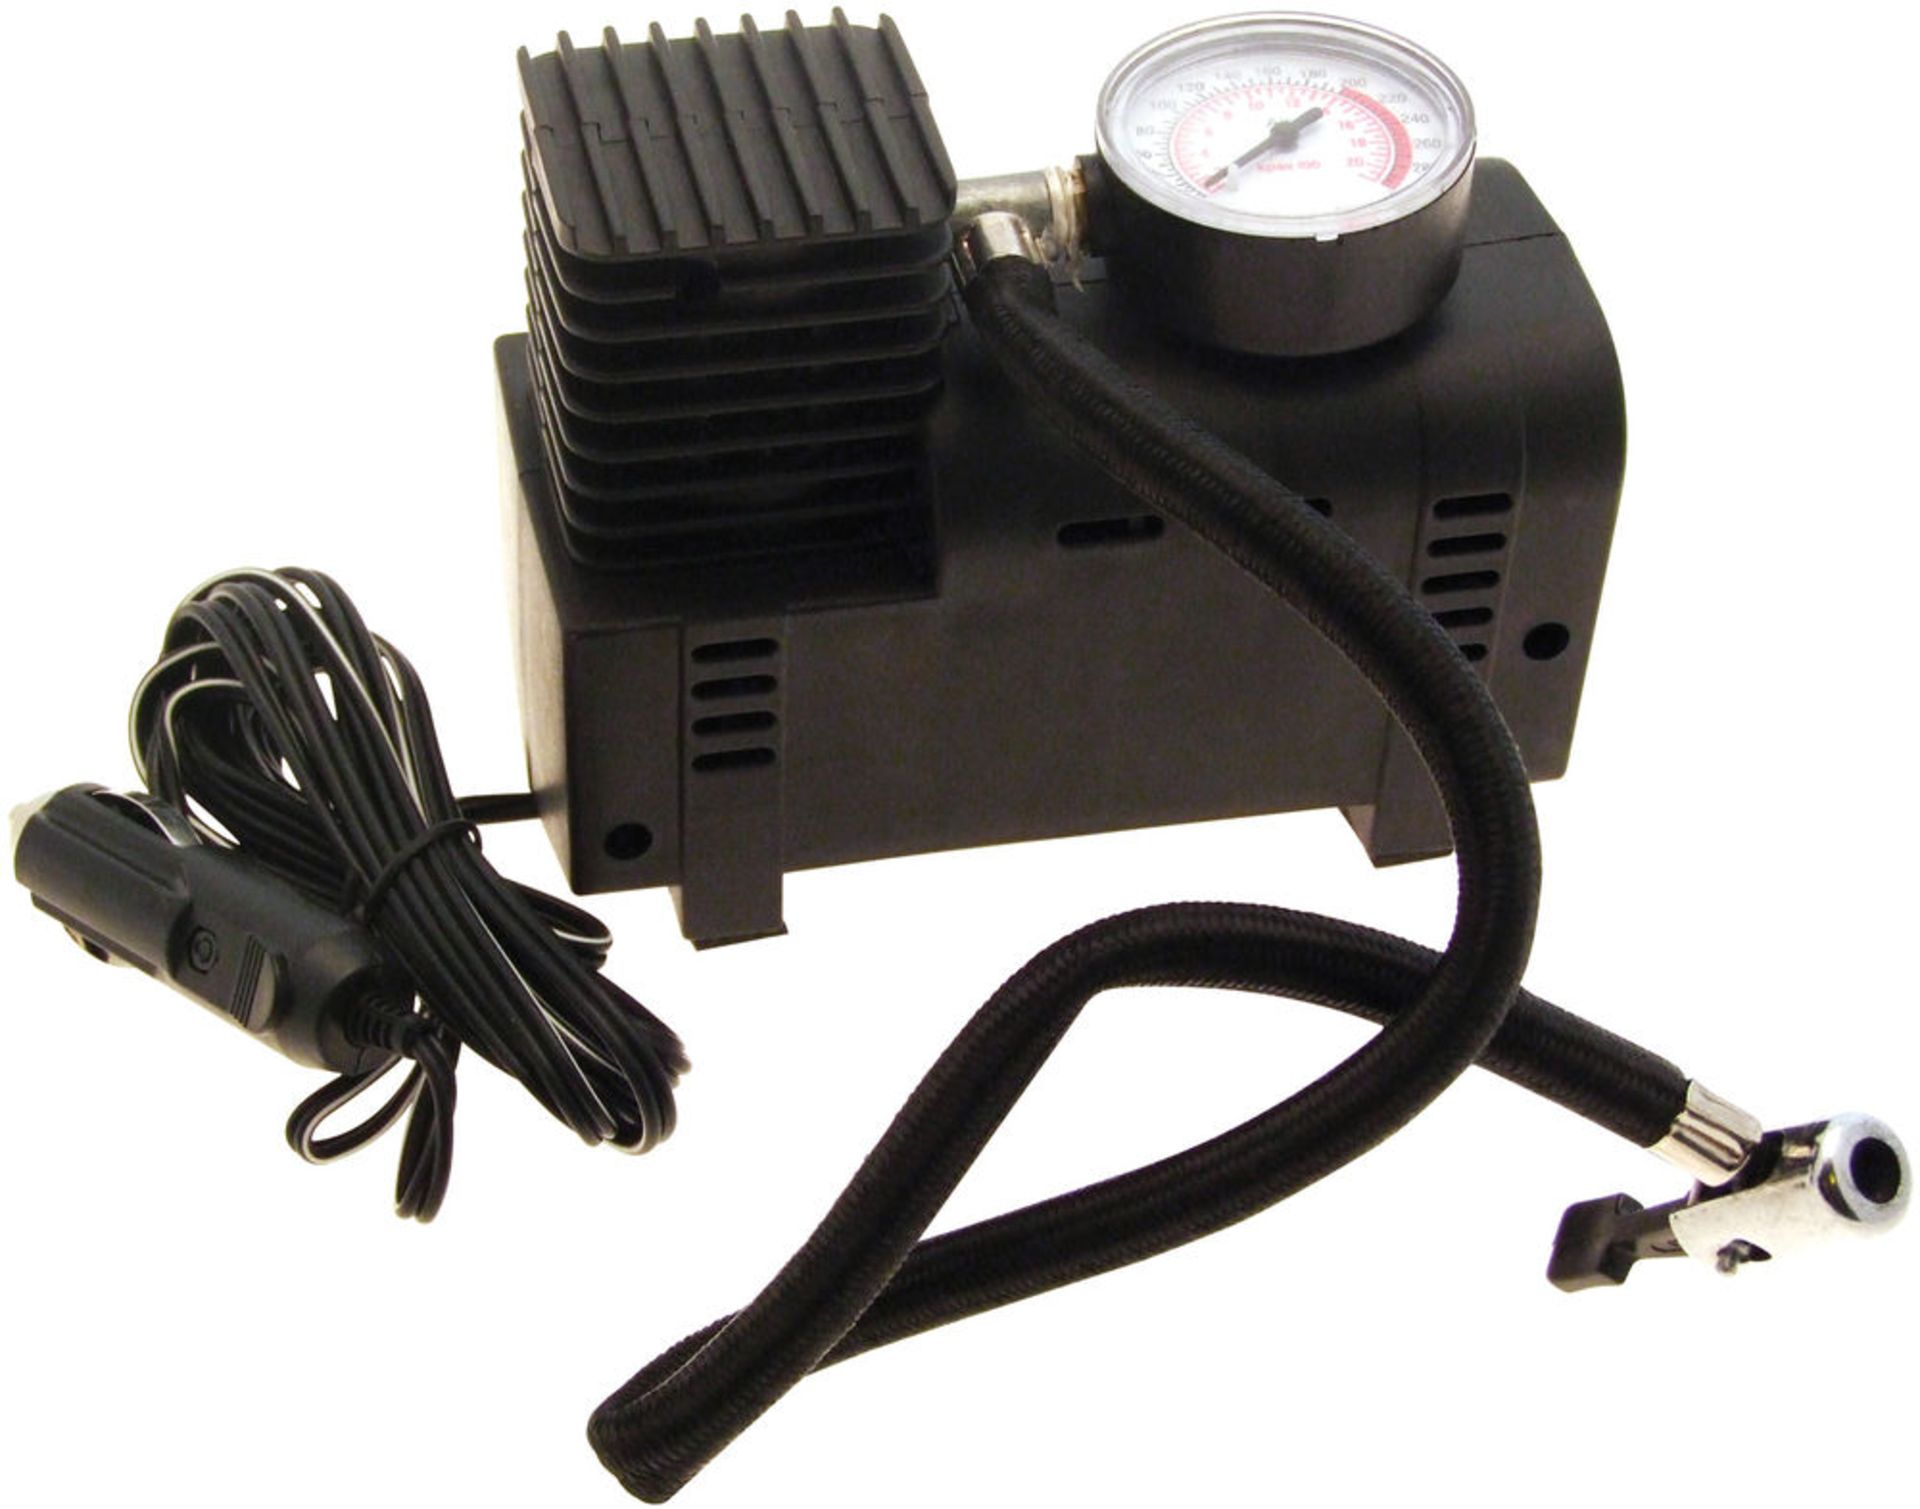 V *TRADE QTY* Brand New 12V Air Compressor 250PSI X 3 YOUR BID PRICE TO BE MULTIPLIED BY THREE